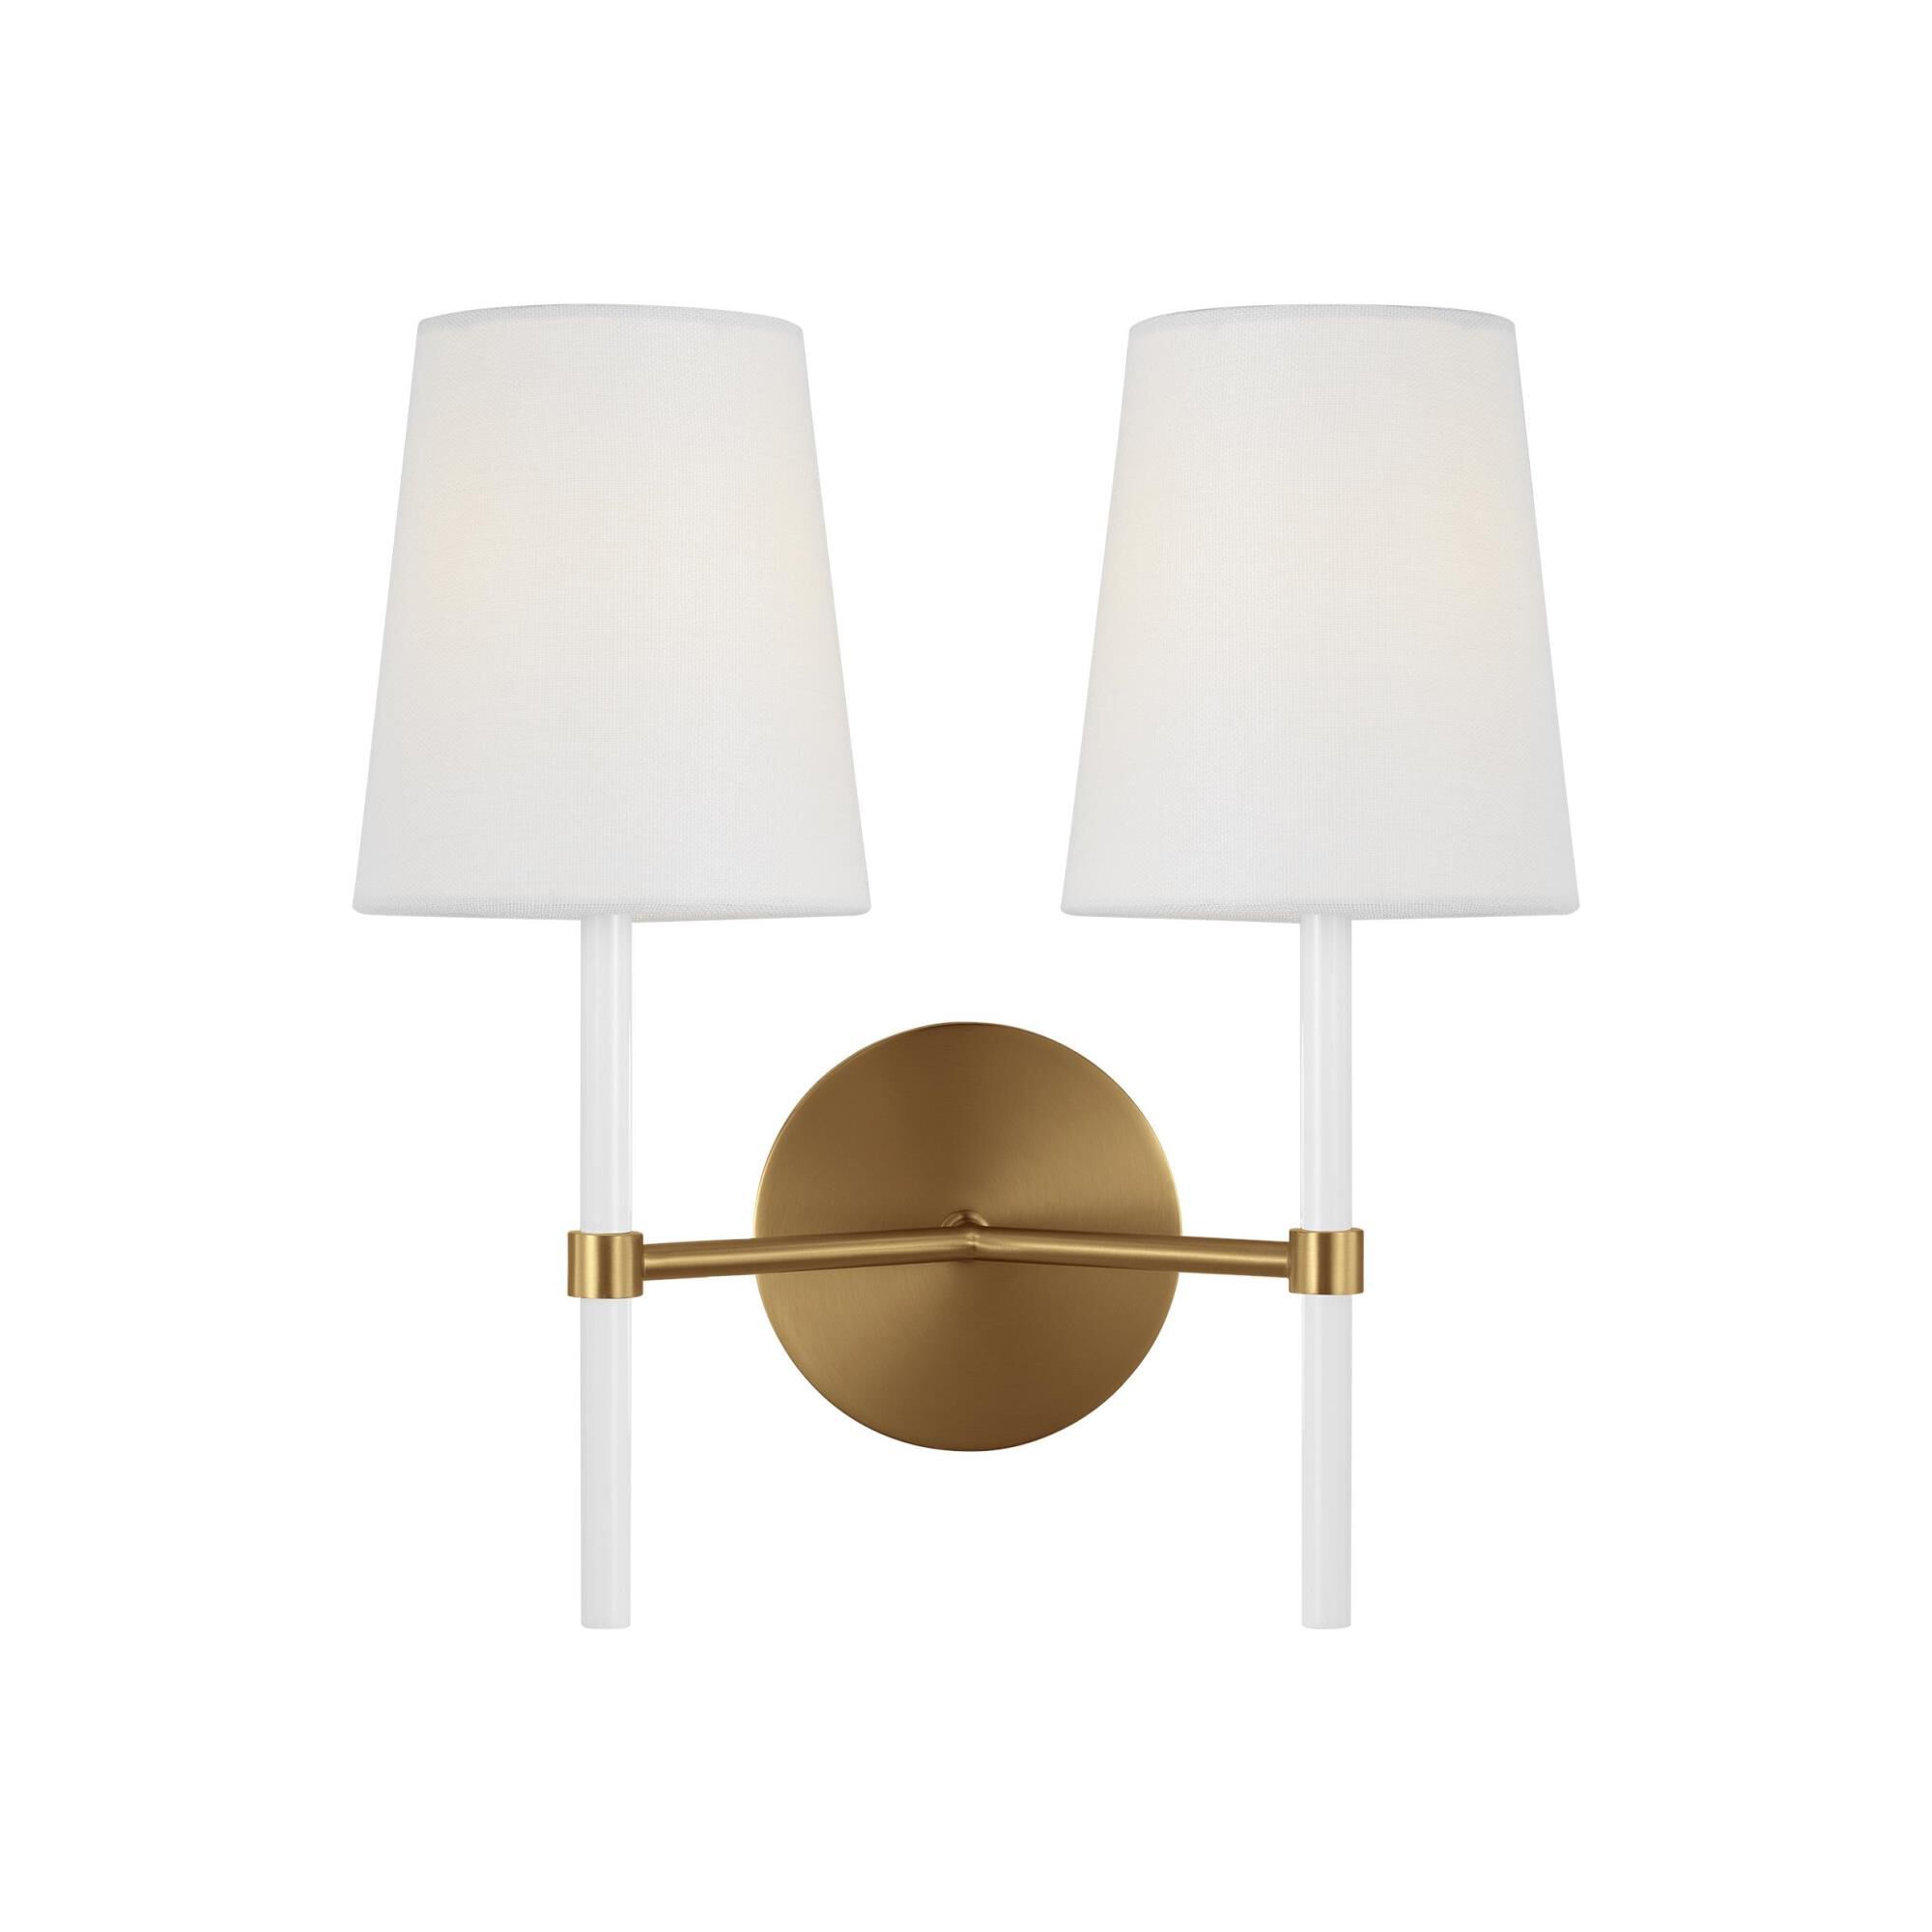 kate spade new york Monroe 12 Inch Wall Sconce by Visual Comfort Studio Collection | 1800 Lighting